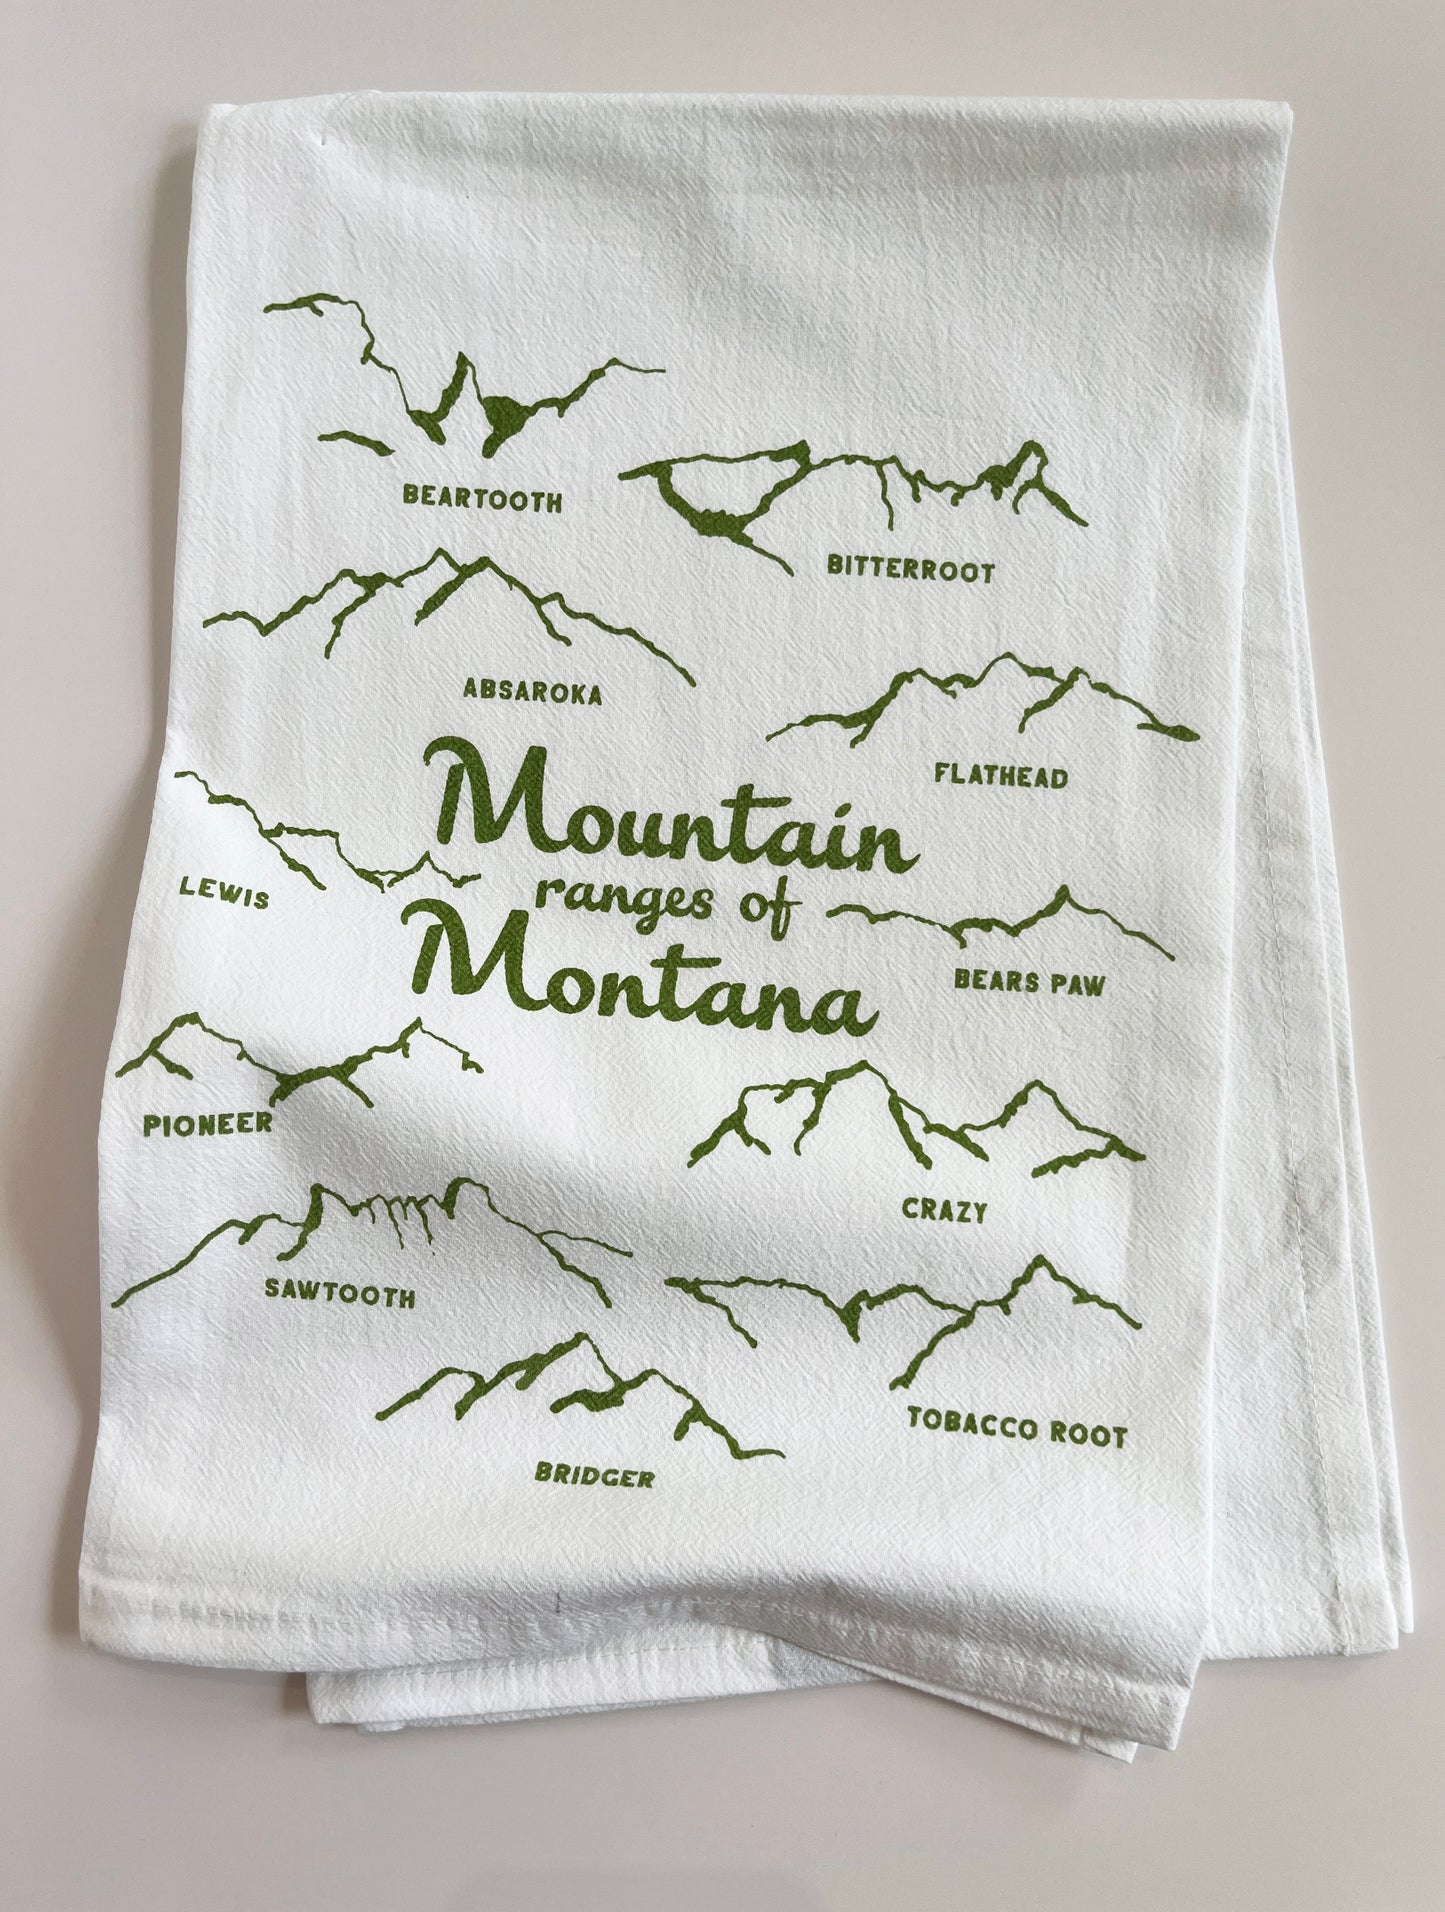 coin laundry screen printed tea towel mountain ranges of montana hand drawn illustration of mountain ranges fun montana gift housewarming wedding gift for visitors cute fun home decor for travelers 